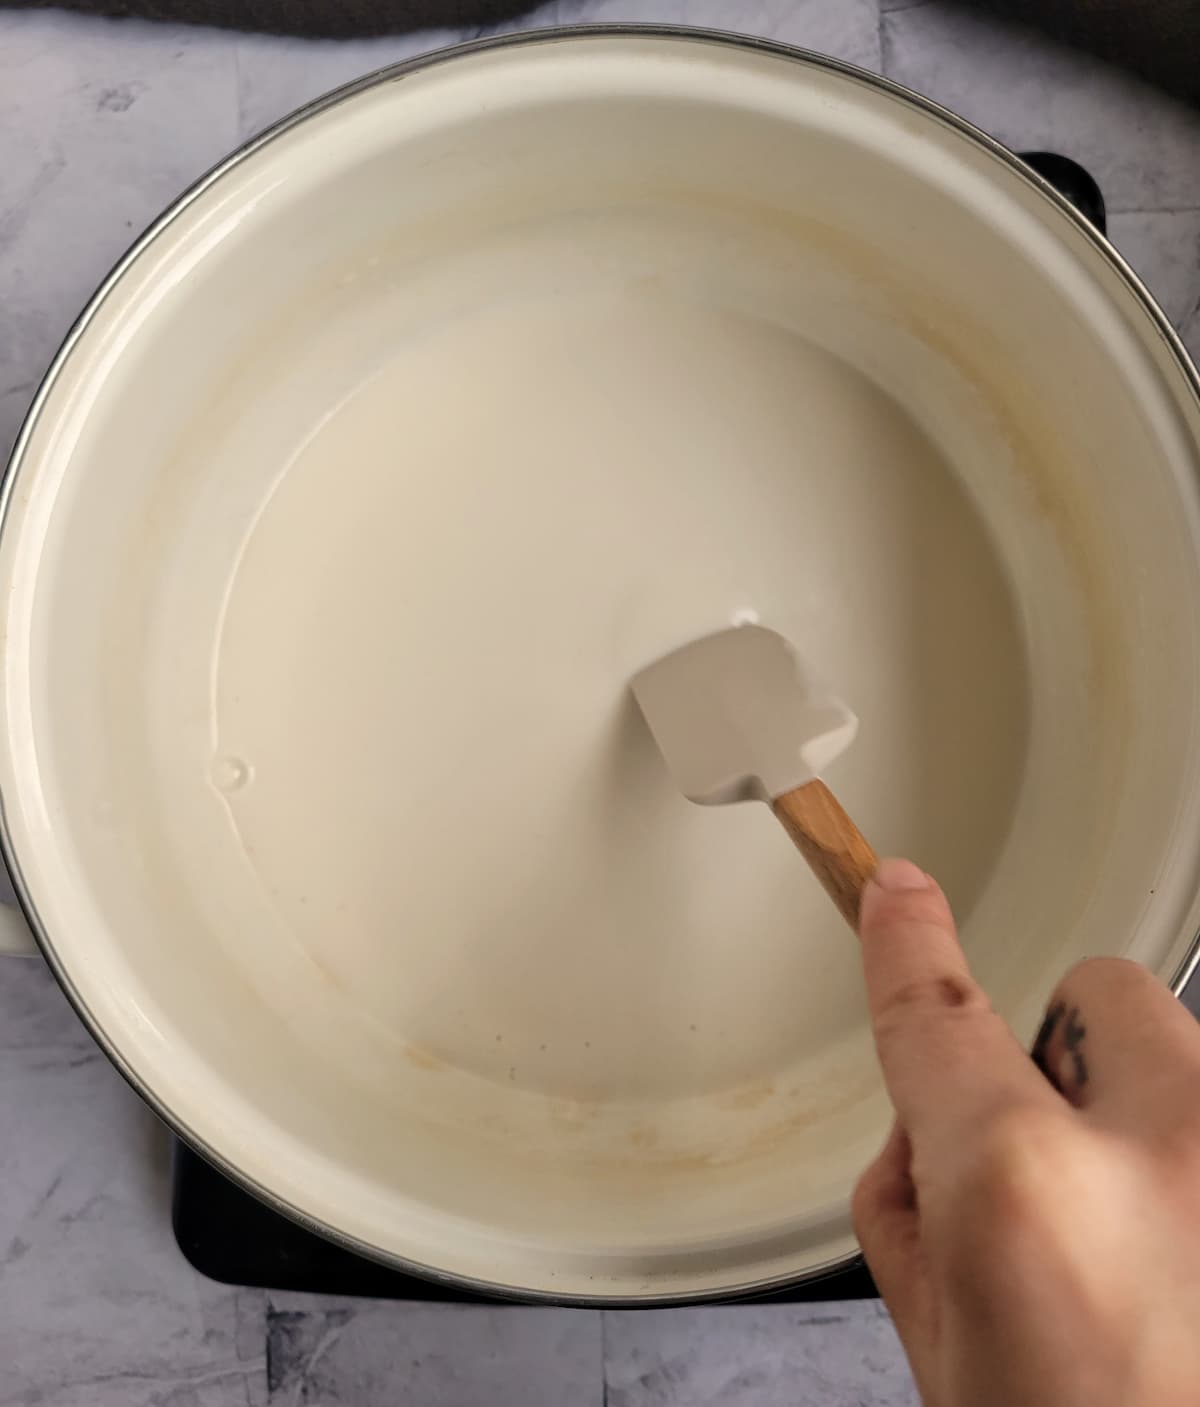 hand with a small rubber spatula in a pot of coconut milk